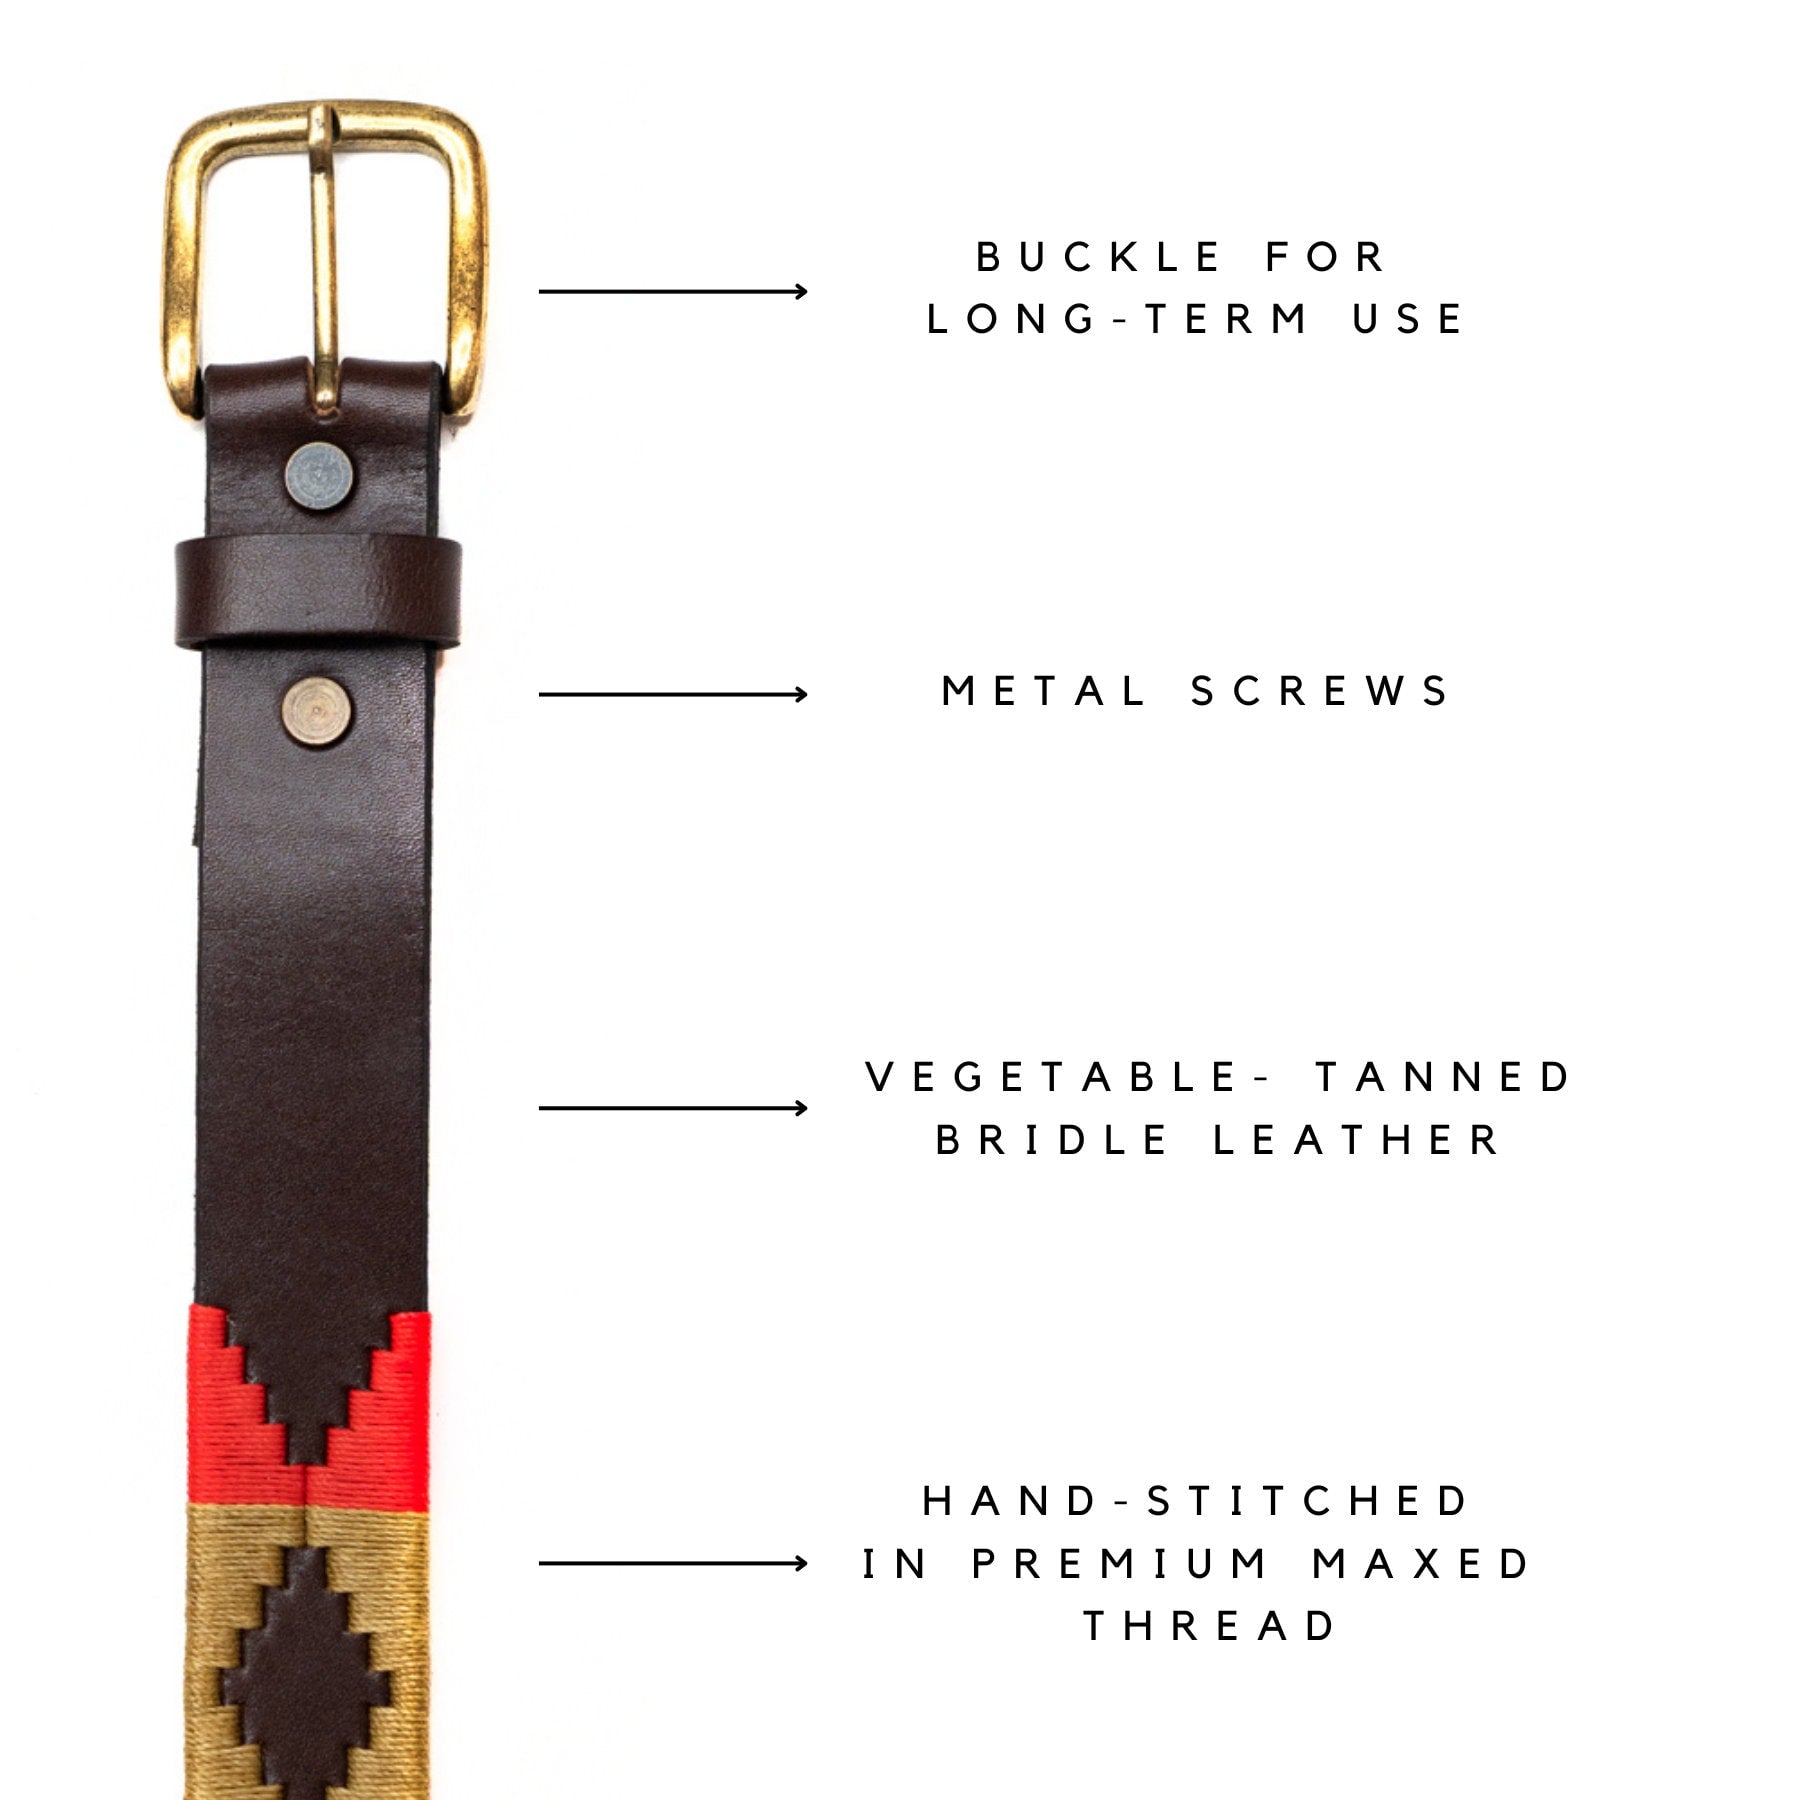 Gaucholife Interchangeable Buckle Embroidered Leather Belt